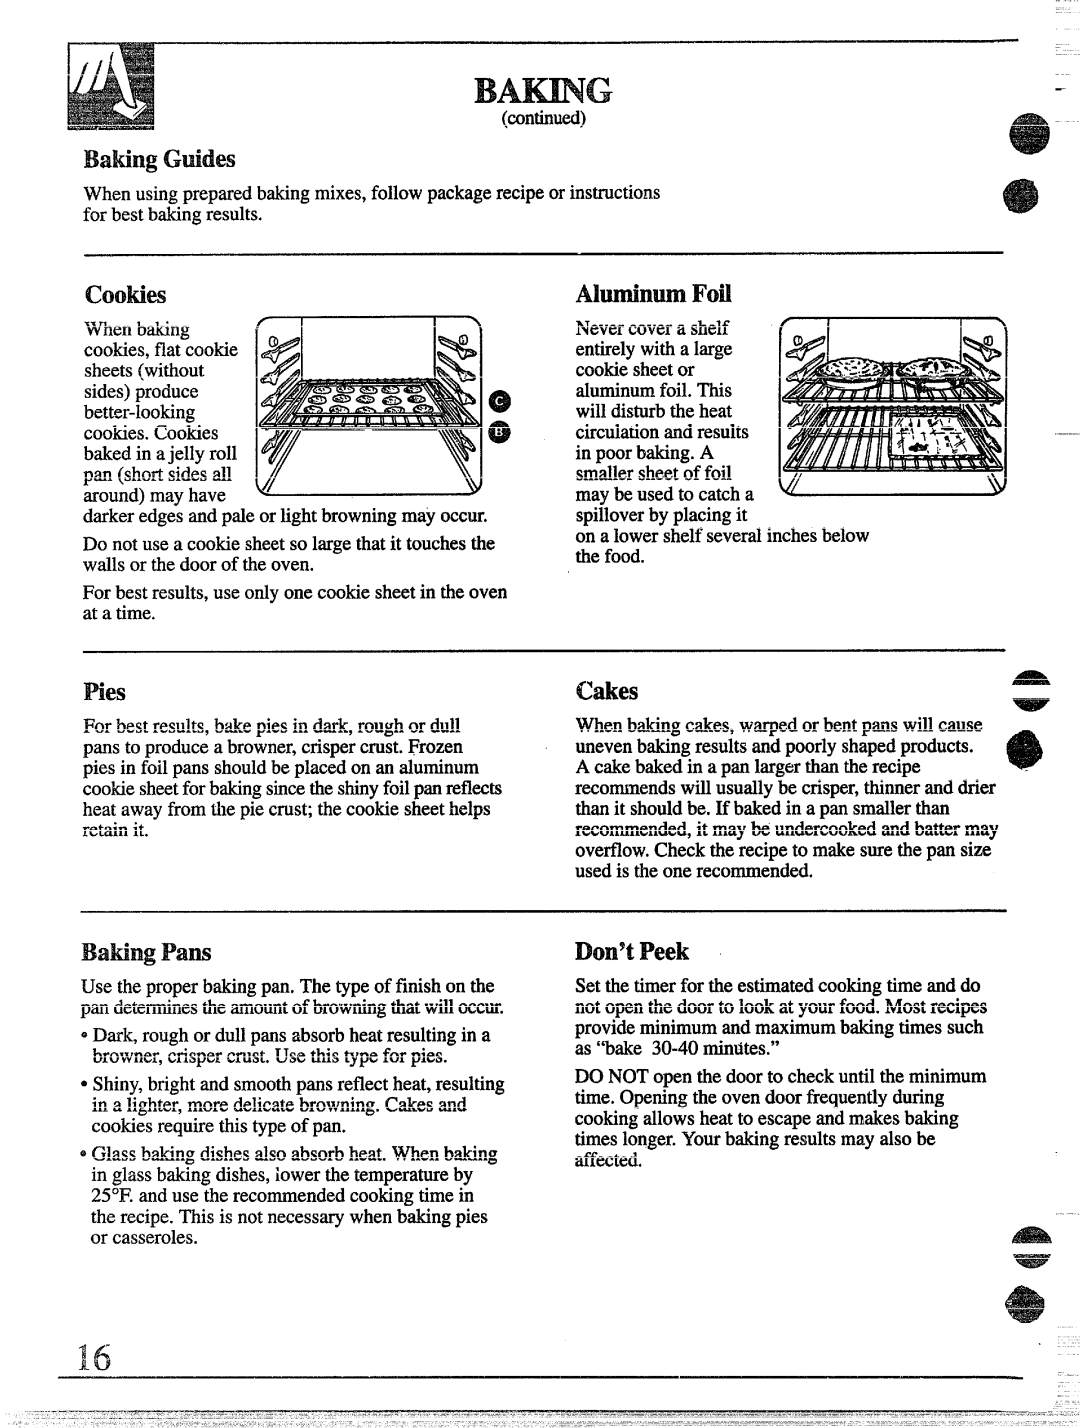 GE 49-8338 installation instructions Bating Guides, Cooties, Bating Pans, Dom9tPeek 